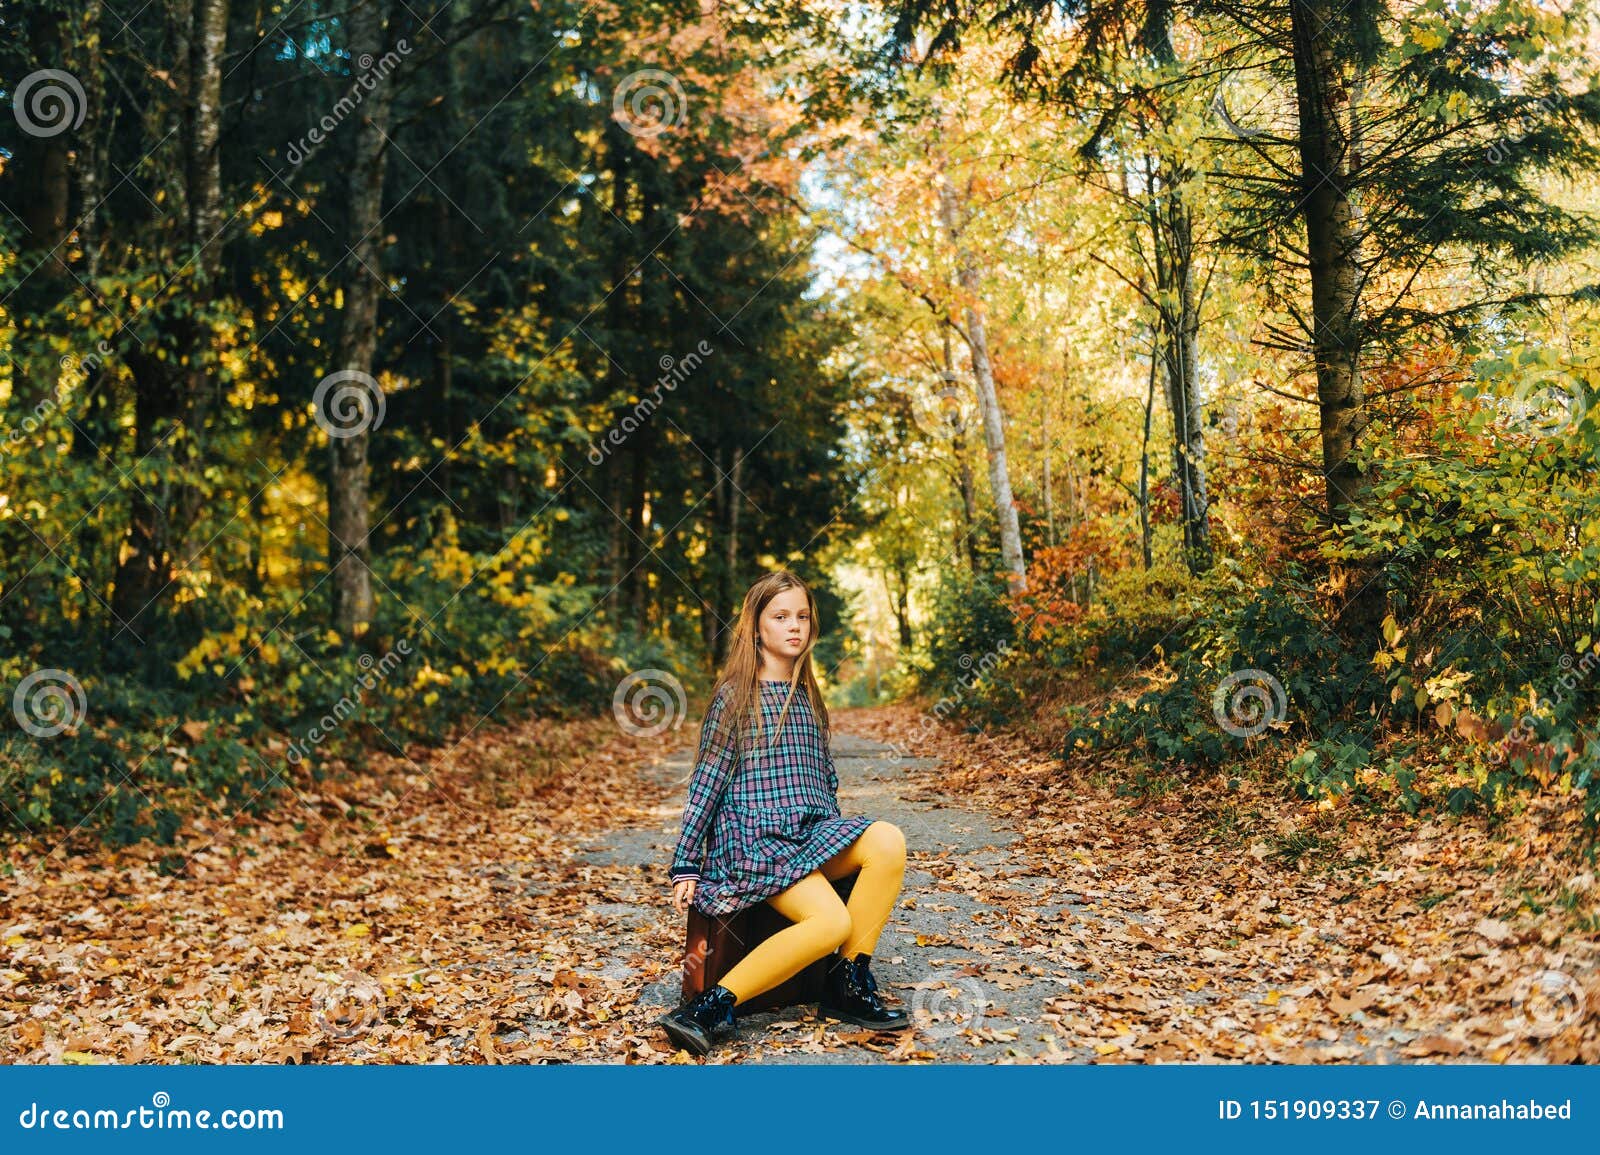 autumn portrait of pretty young girl